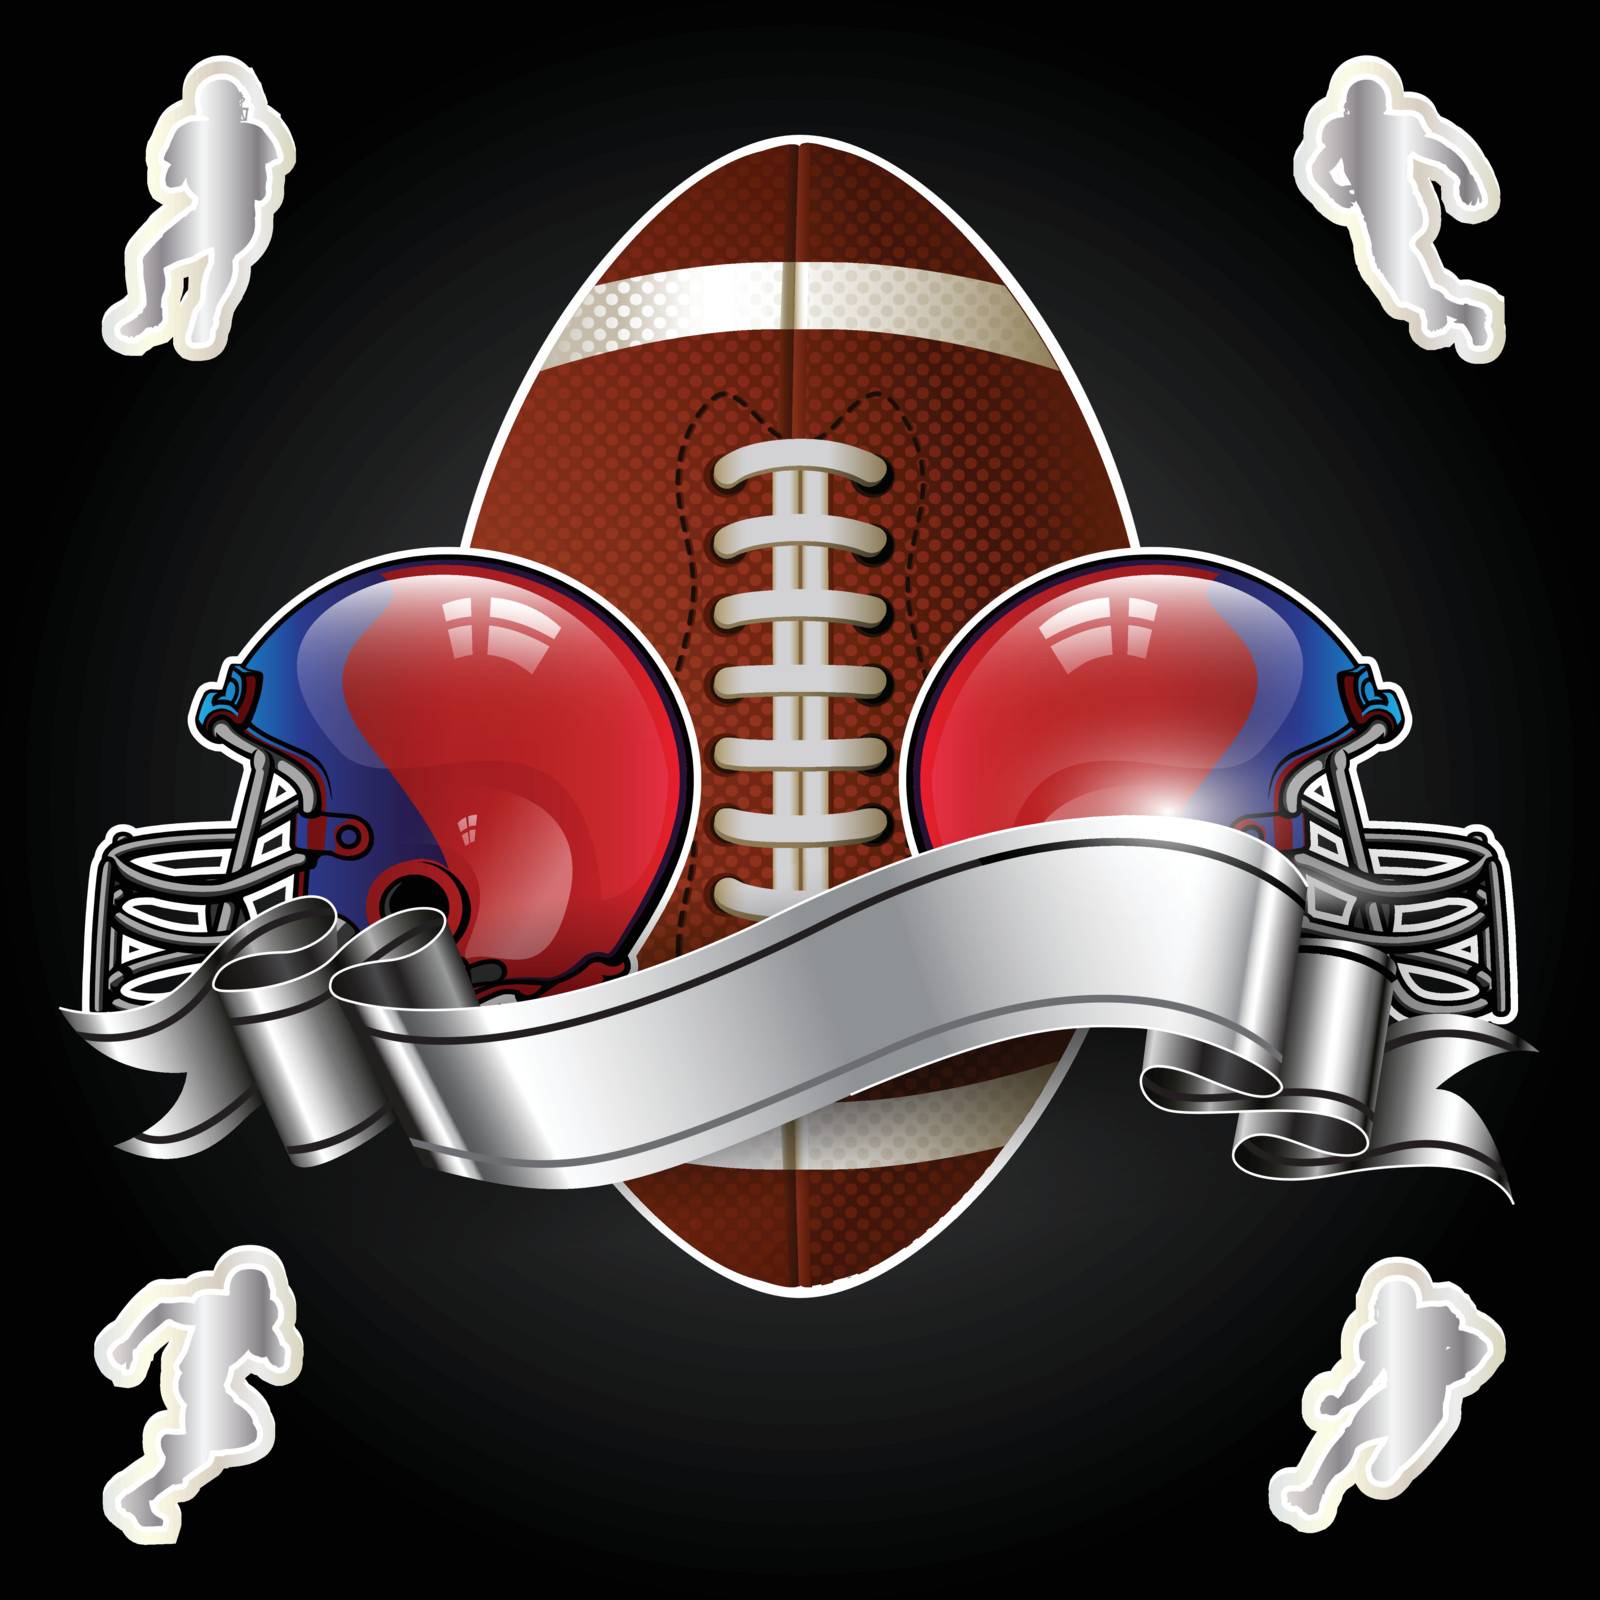 Emblem of American football with helmet on black background by nirots